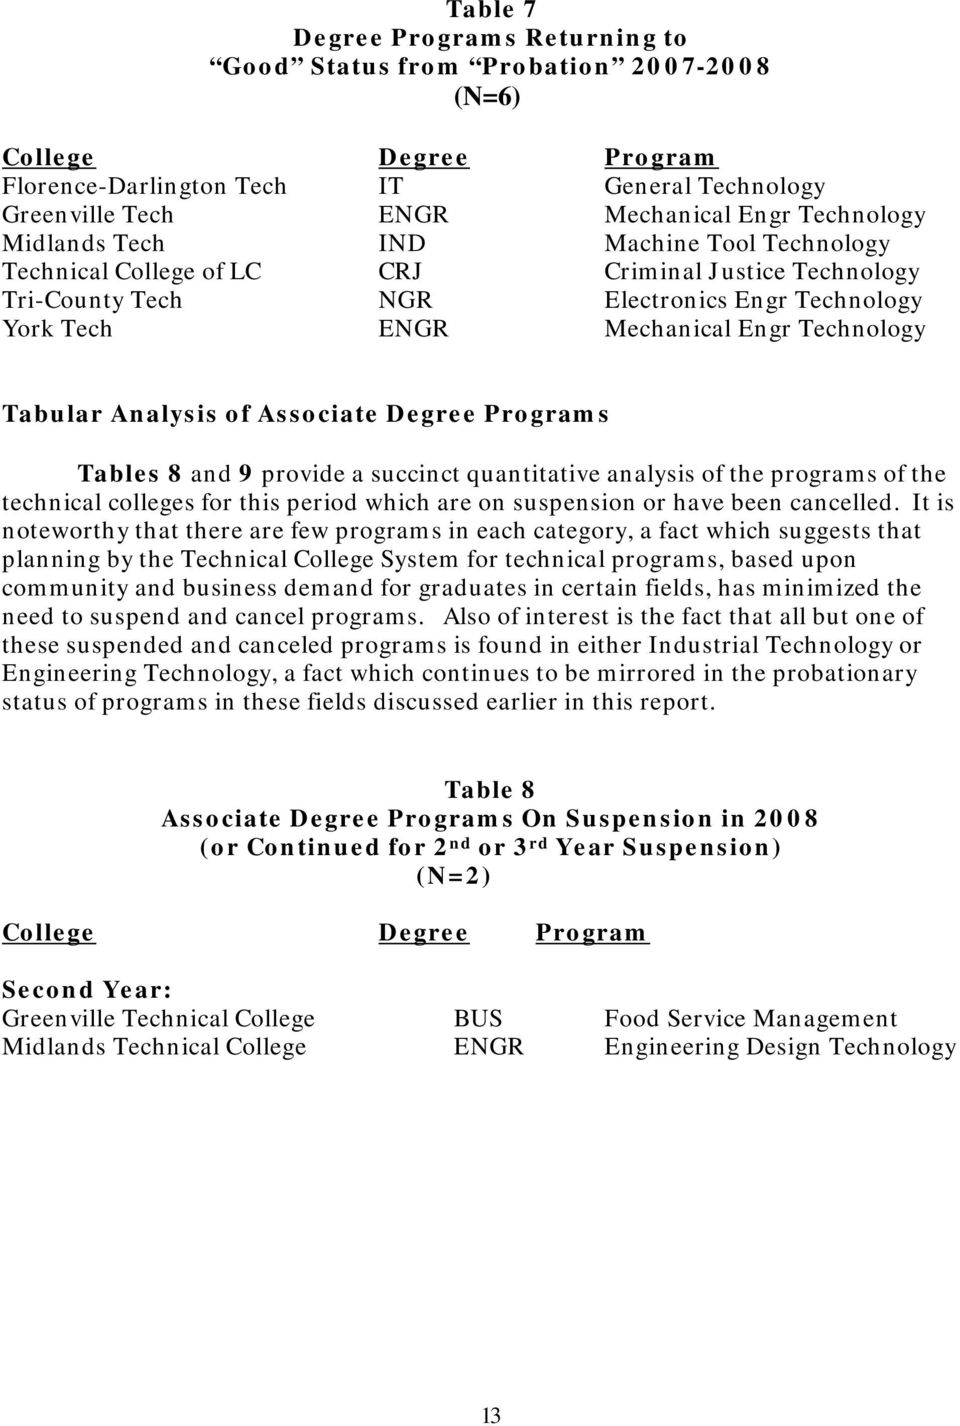 Analysis of Associate Degree Programs Tables 8 and 9 provide a succinct quantitative analysis of the programs of the technical colleges for this period which are on suspension or have been cancelled.